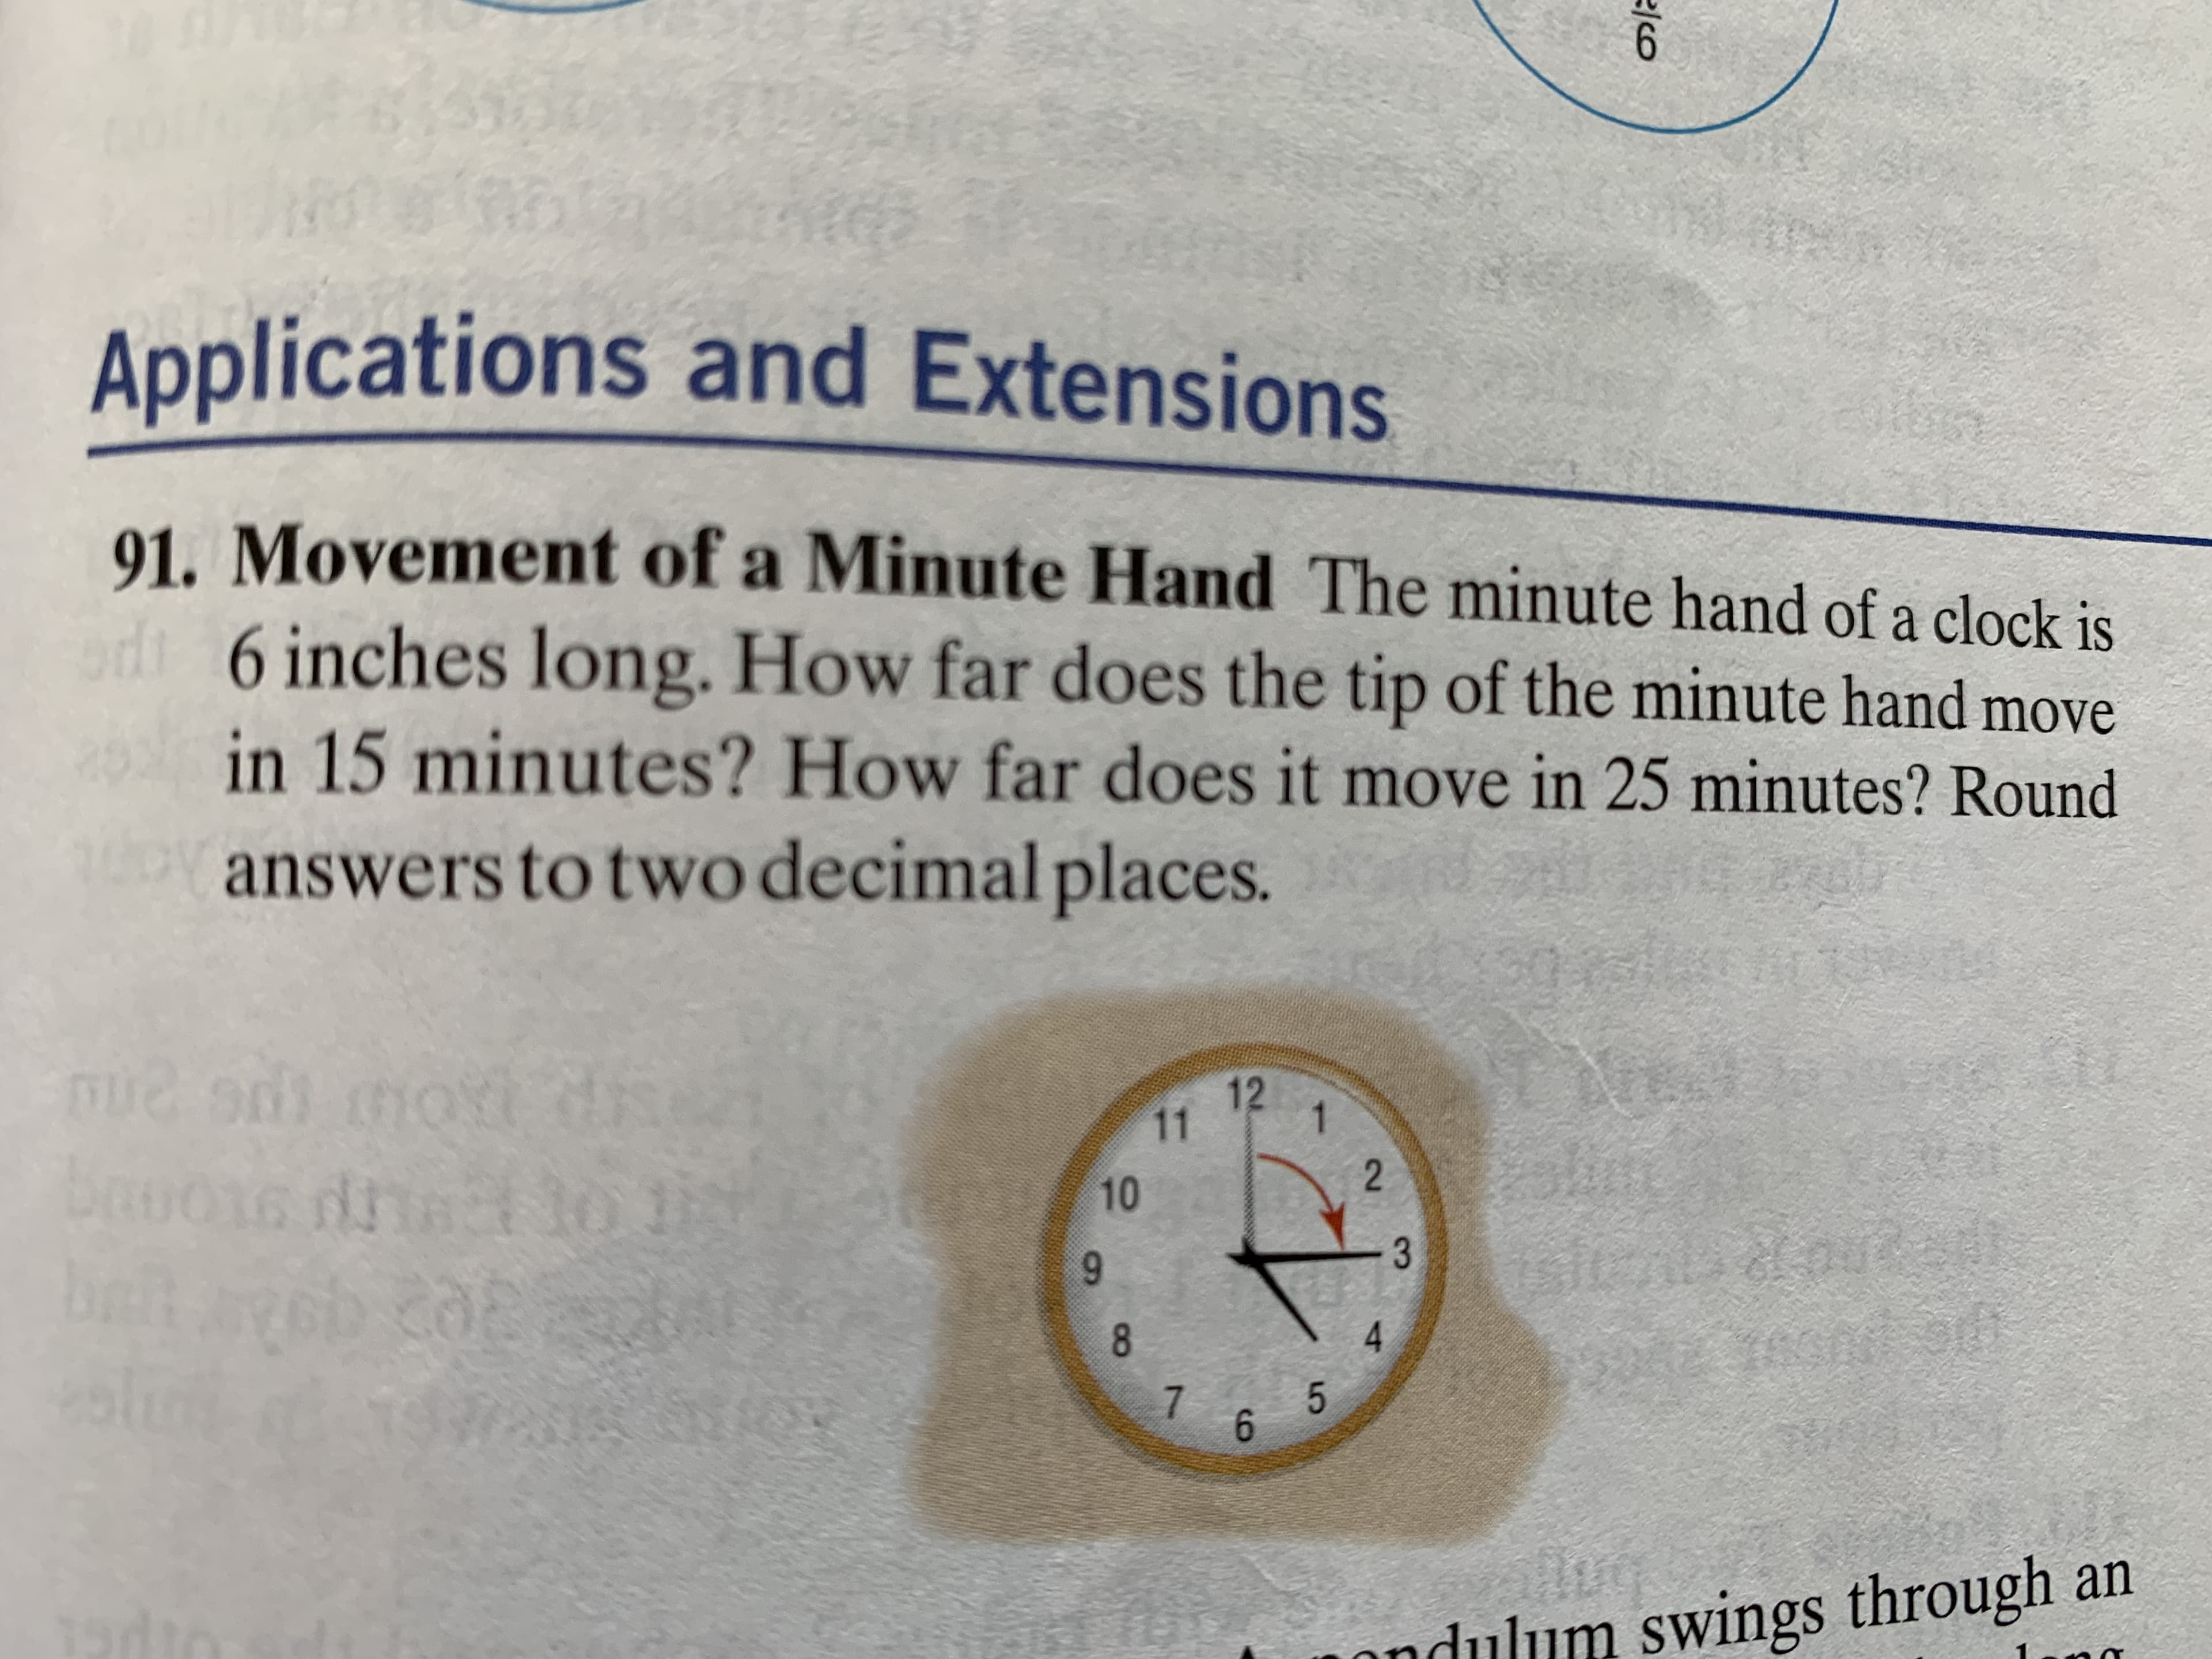 ### Applications and Extensions

#### 91. Movement of a Minute Hand

The minute hand of a clock is 6 inches long. How far does the tip of the minute hand move in 15 minutes? How far does it move in 25 minutes? Round answers to two decimal places.

![Clock](data:image/png;base64,...) (An image of a clock with the minute hand pointing at 3 and the hour hand pointing at 12)

Explanation:
1. **Understanding Clock Movement:**
   - The minute hand completes a full circle (360 degrees) in 60 minutes.
   - In 15 minutes, the minute hand covers a quarter of the clock (360/4 = 90 degrees).
   - In 25 minutes, the minute hand covers 25/60 of the clock (360 * 25/60 = 150 degrees).

2. **Calculations:**
   - **Arc Length Formula**: \( \text{Arc Length} = \theta \times r \times \left( \frac{\pi}{180} \right) \)
   - Where \( \theta \) is the angle in degrees, \( r \) is the radius (length of the minute hand), and \(\pi\) is approximately 3.14.

### For 15 minutes:
\[ \text{Arc Length} = 90 \times 6 \times \left( \frac{\pi}{180} \right) \]
\[ = 90 \times 6 \times \left( \frac{3.14}{180} \right) \]
\[ = 90 \times 6 \times 0.01745 \]
\[ = 9.42 \text{ inches (rounded to two decimal places)} \]

### For 25 minutes:
\[ \text{Arc Length} = 150 \times 6 \times \left( \frac{\pi}{180} \right) \]
\[ = 150 \times 6 \times \left( \frac{3.14}{180} \right) \]
\[ = 150 \times 6 \times 0.01745 \]
\[ = 15.71 \text{ inches (rounded to two decimal places)} \]

Therefore:
- The minute hand moves **9.42 inches** in 15 minutes.
- The minute hand moves **15.71 inches** in 25 minutes.